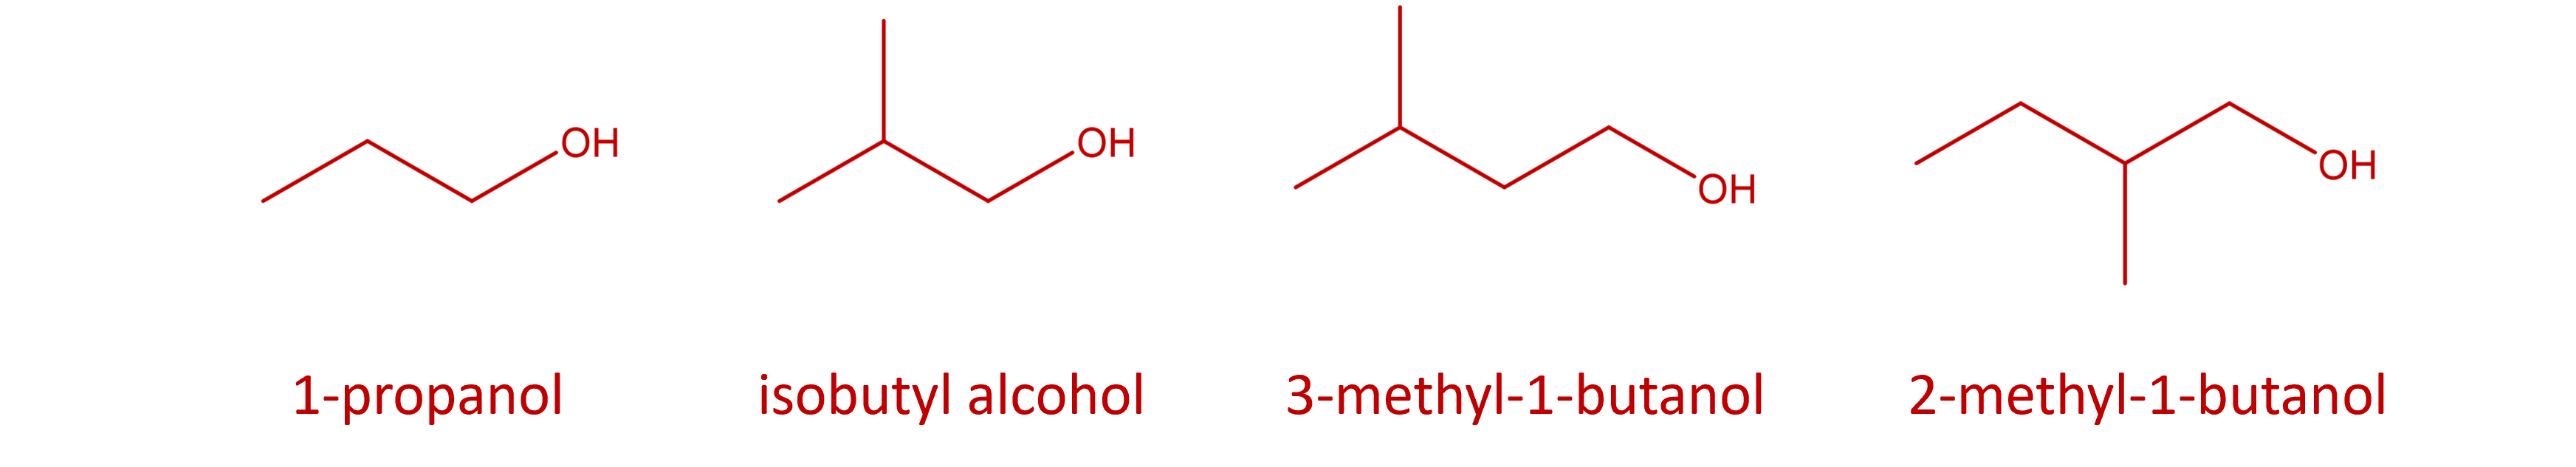 structures of fusel alcohols